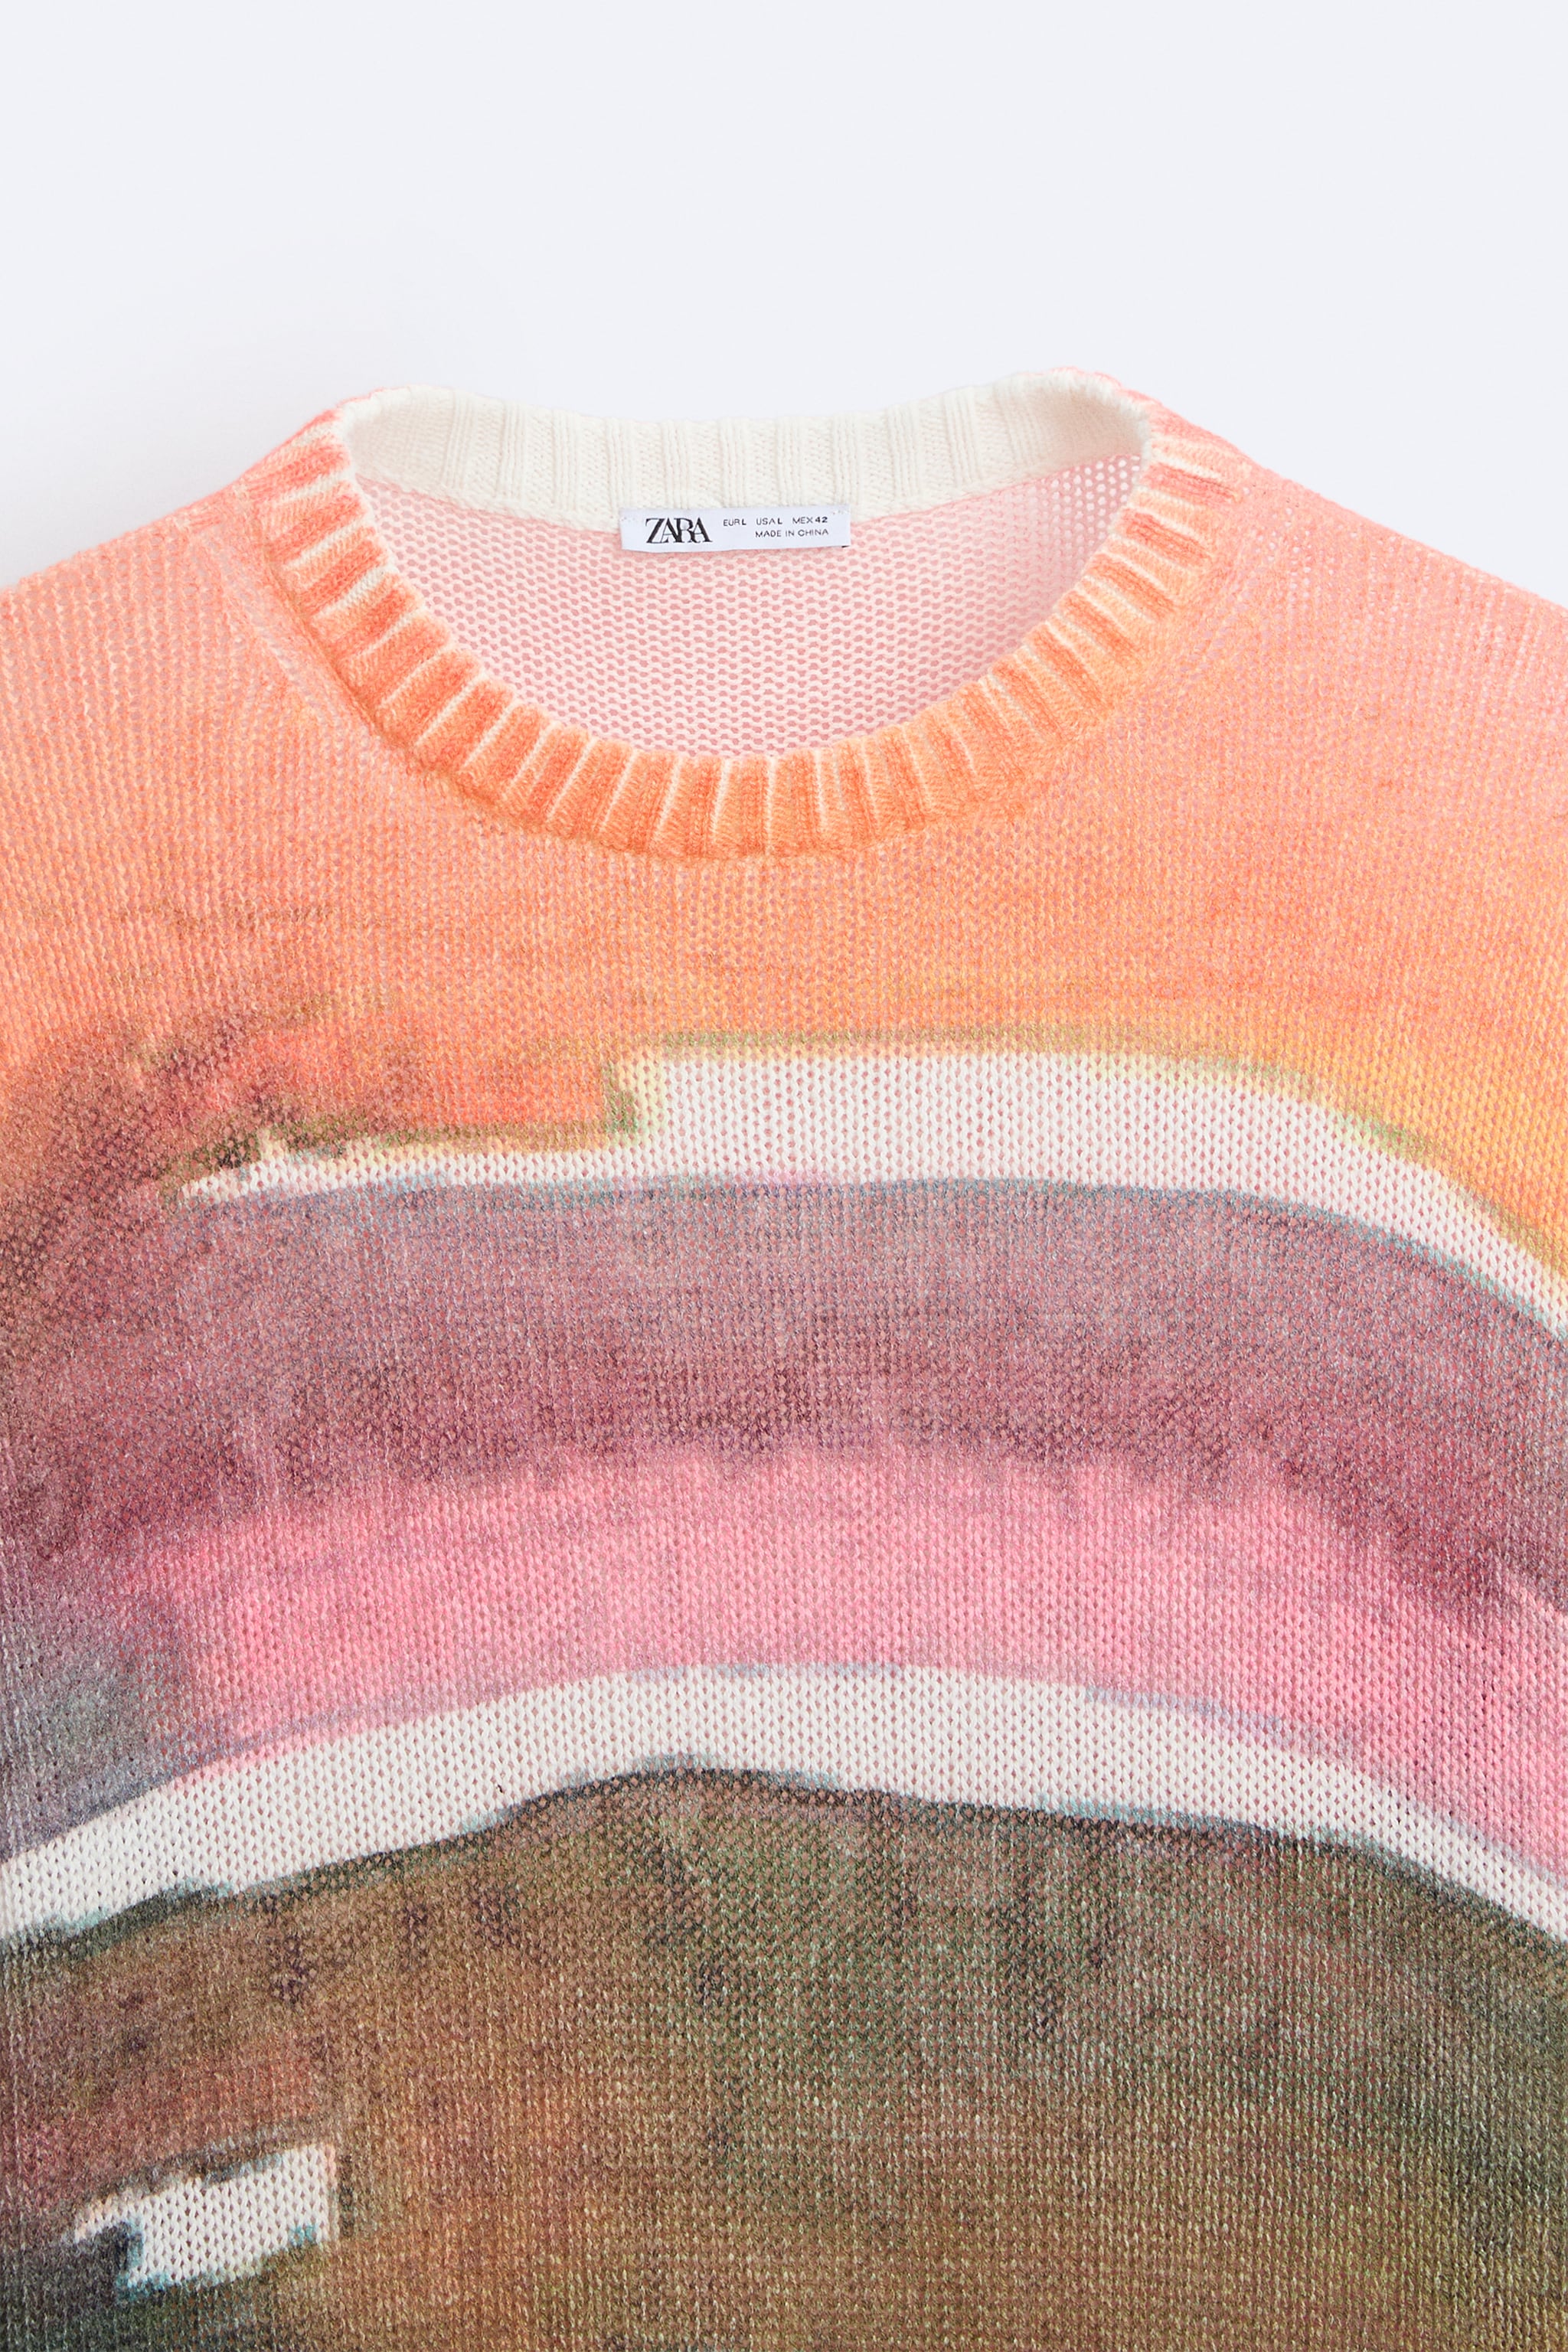 ABSTRACT PRINT SWEATER